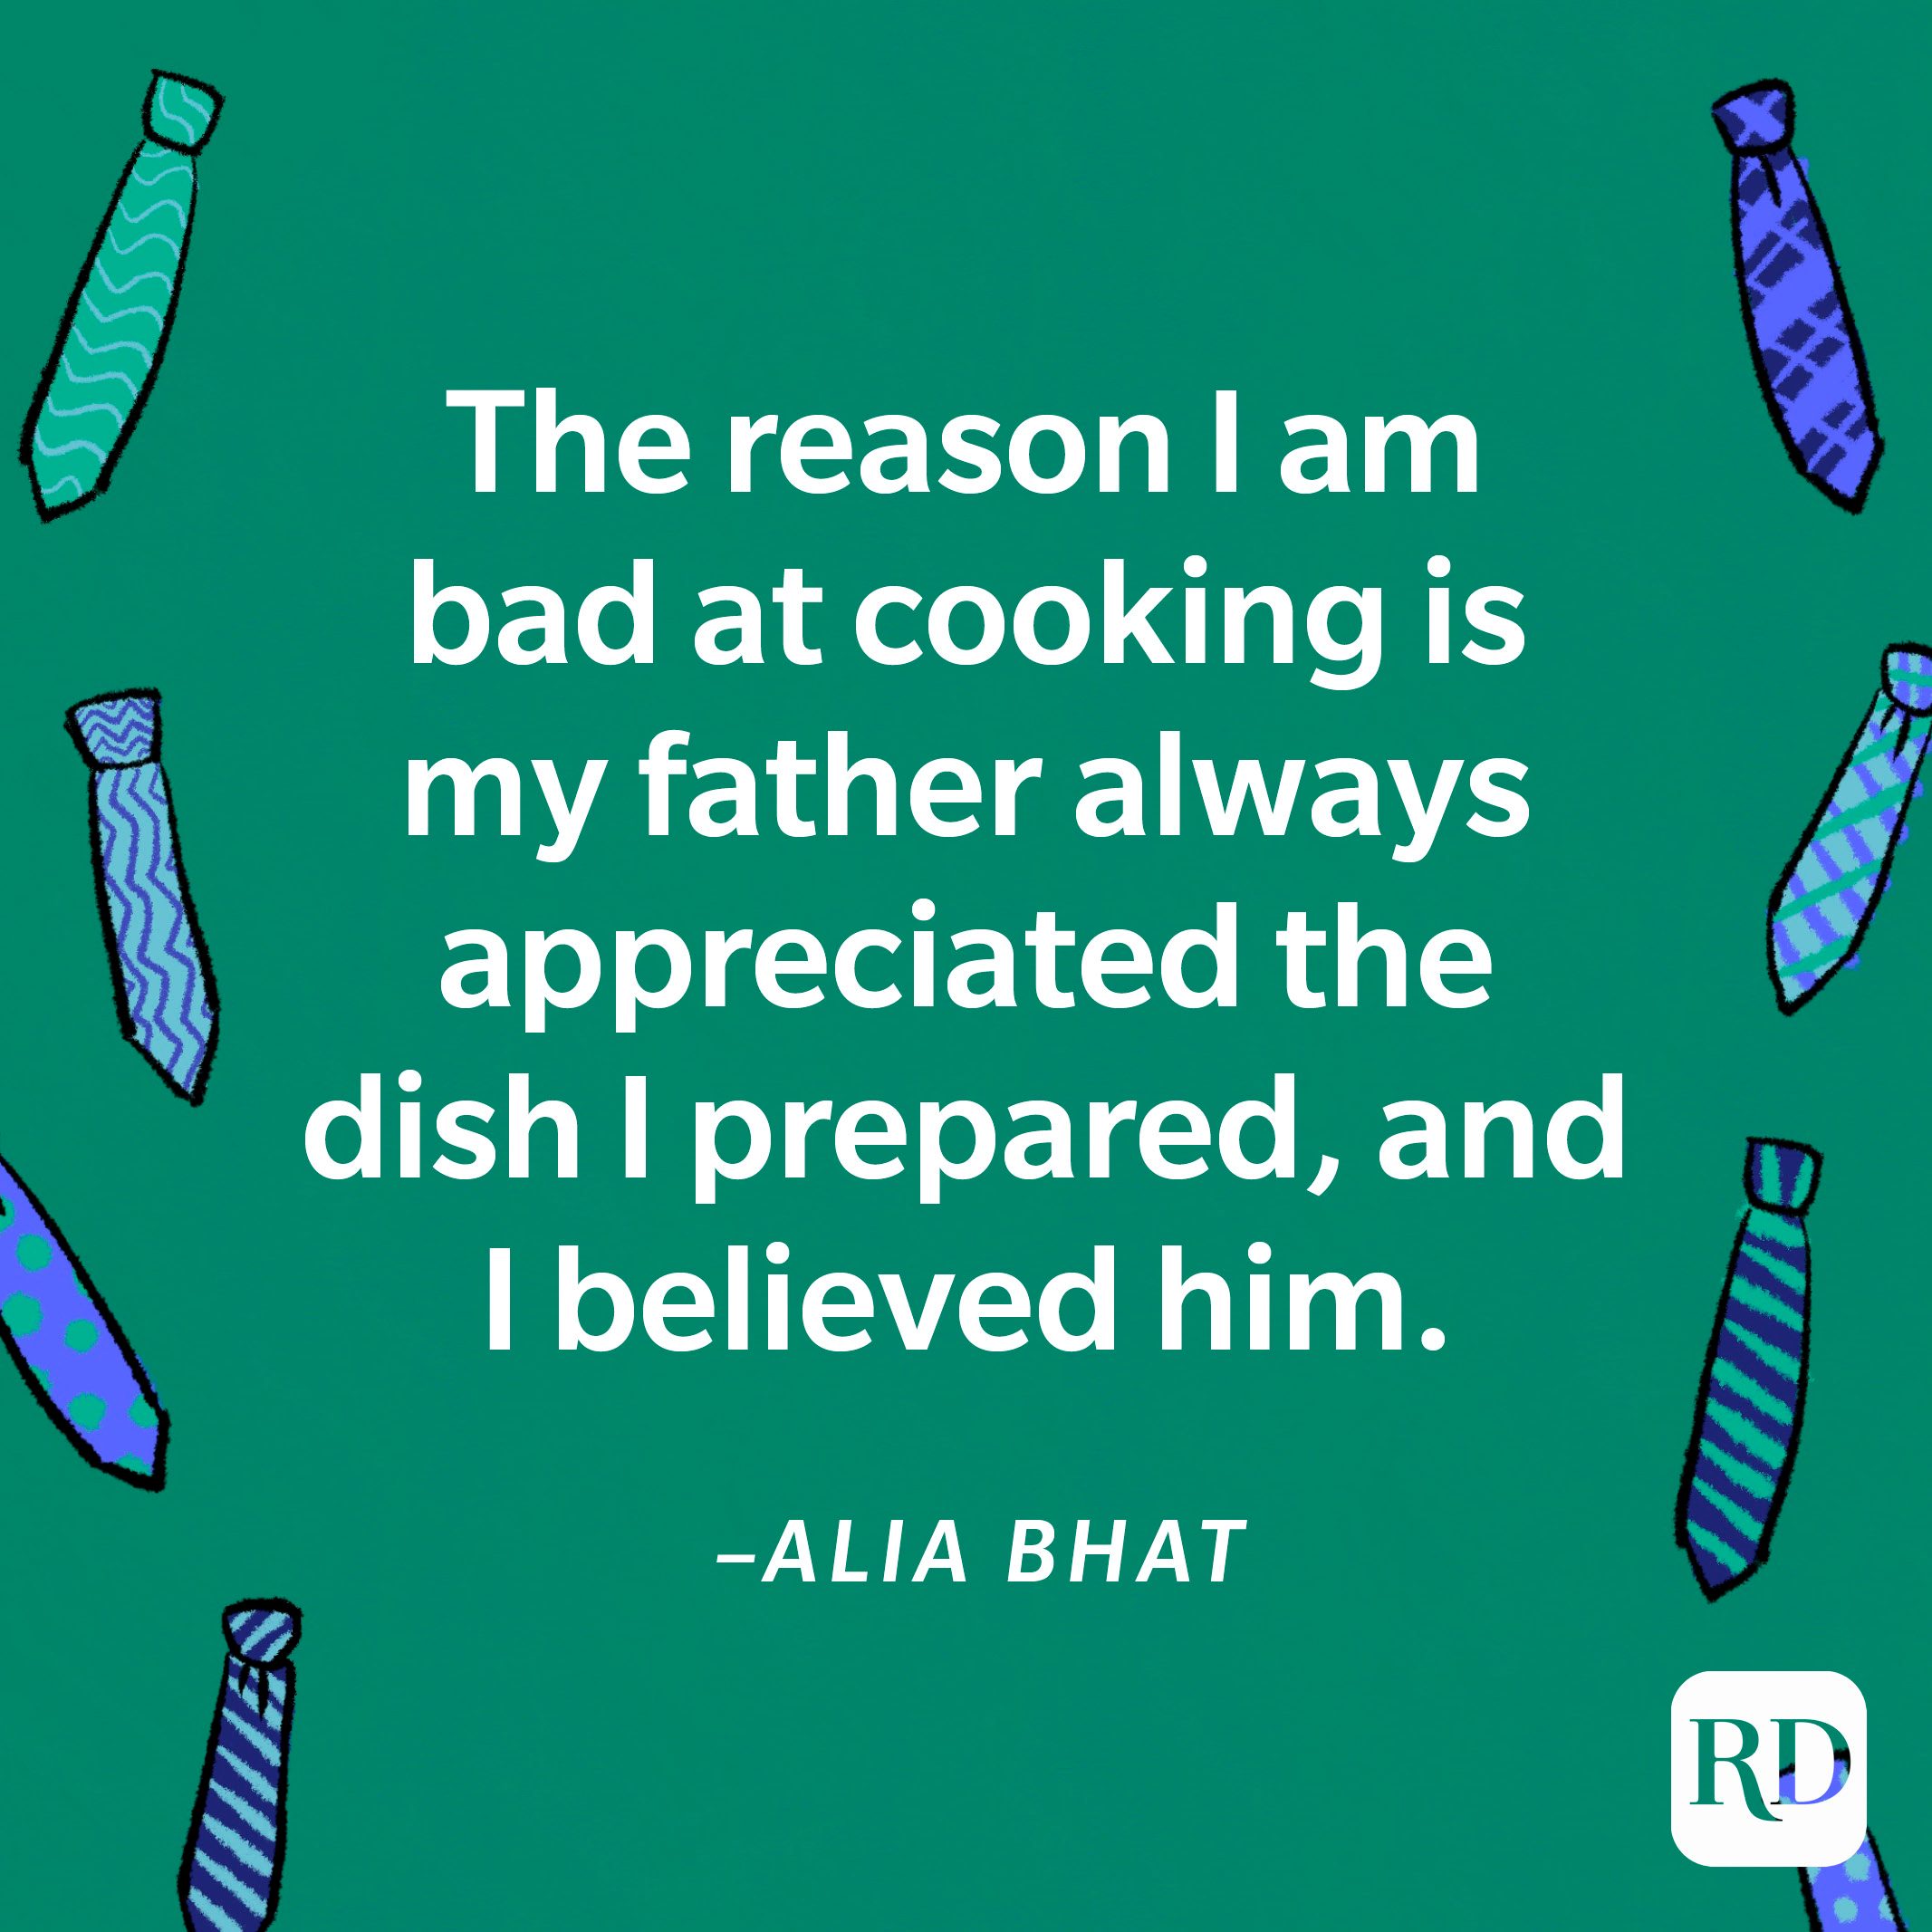 “The reason I am bad at cooking is my father always appreciated the dish I prepared, and I believed him.”—Alia Bhat